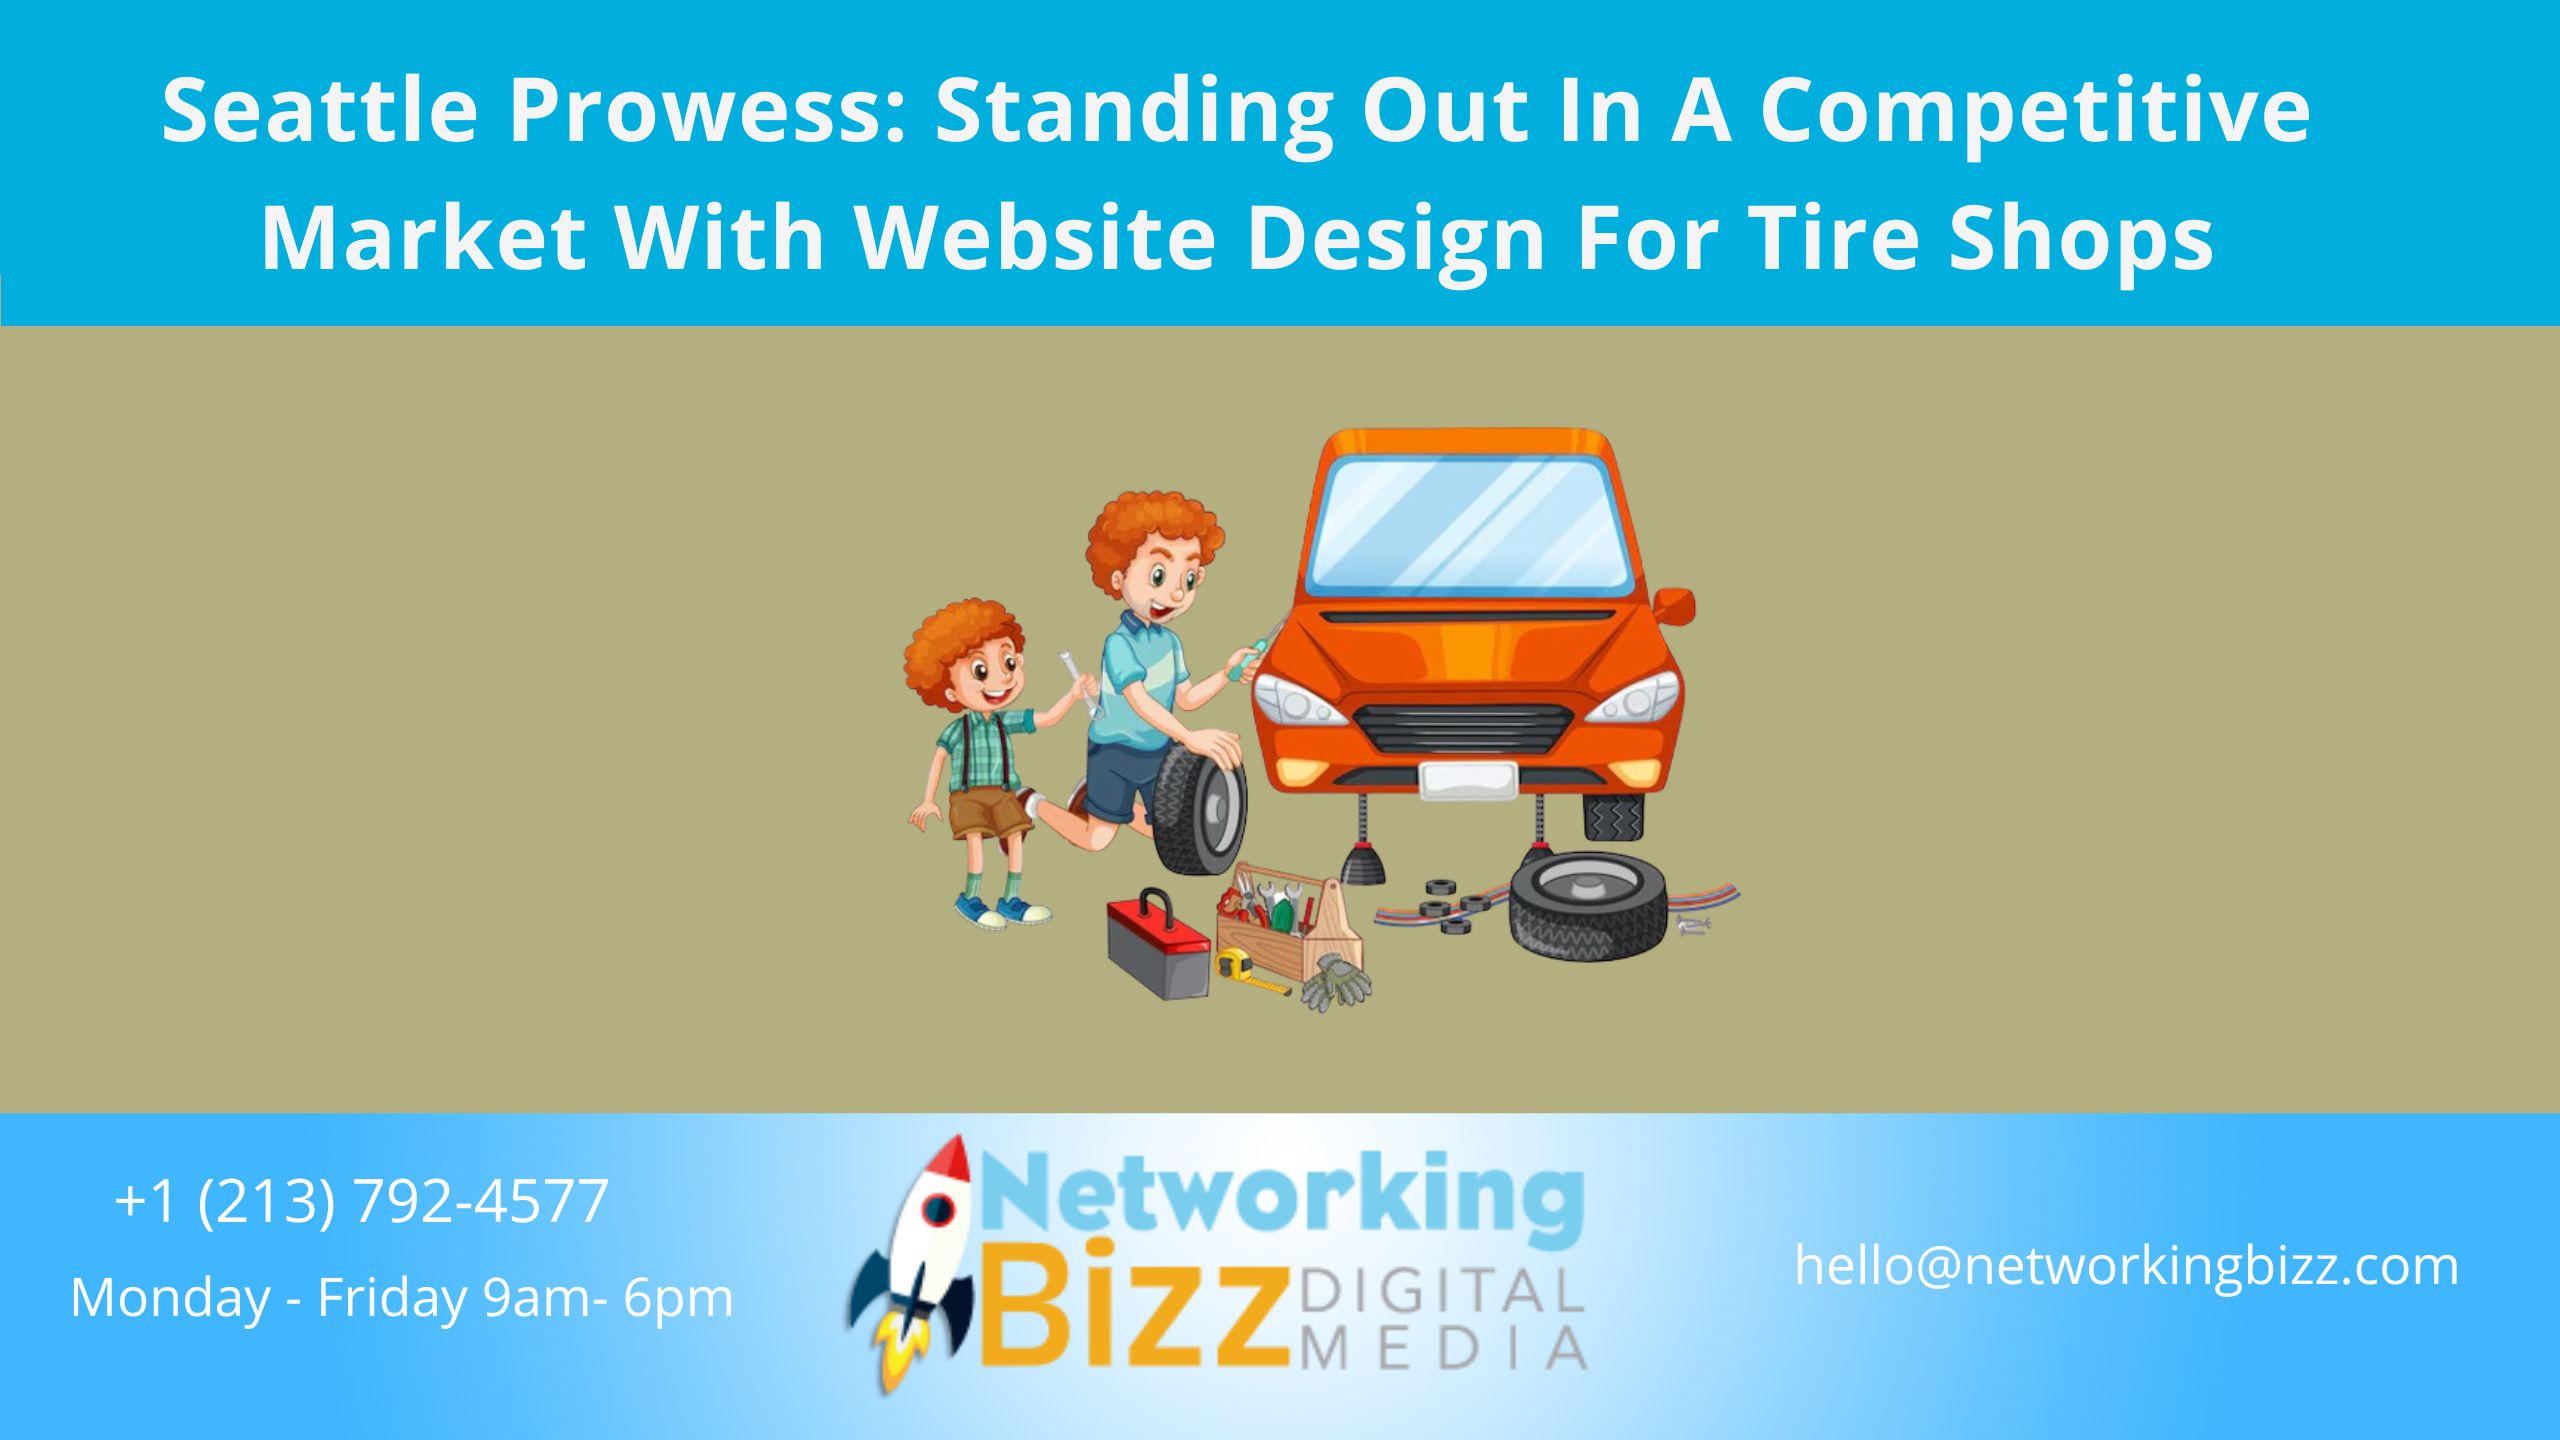 Seattle Prowess: Standing Out In A Competitive Market With Website Design For Tire Shops